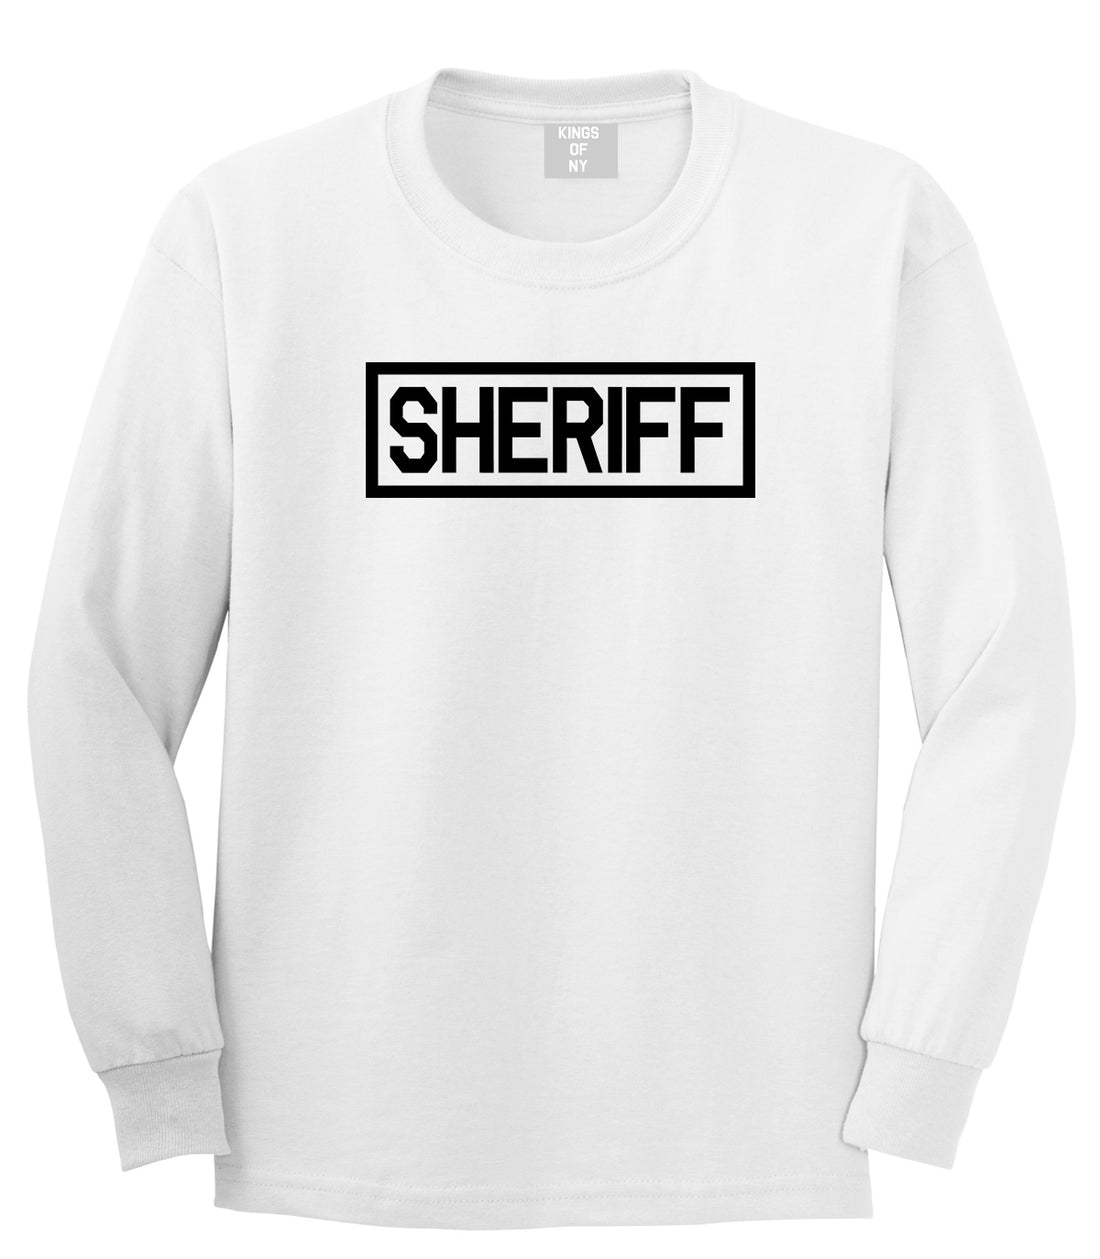 Sheriff County Police Mens White Long Sleeve T-Shirt by Kings Of NY